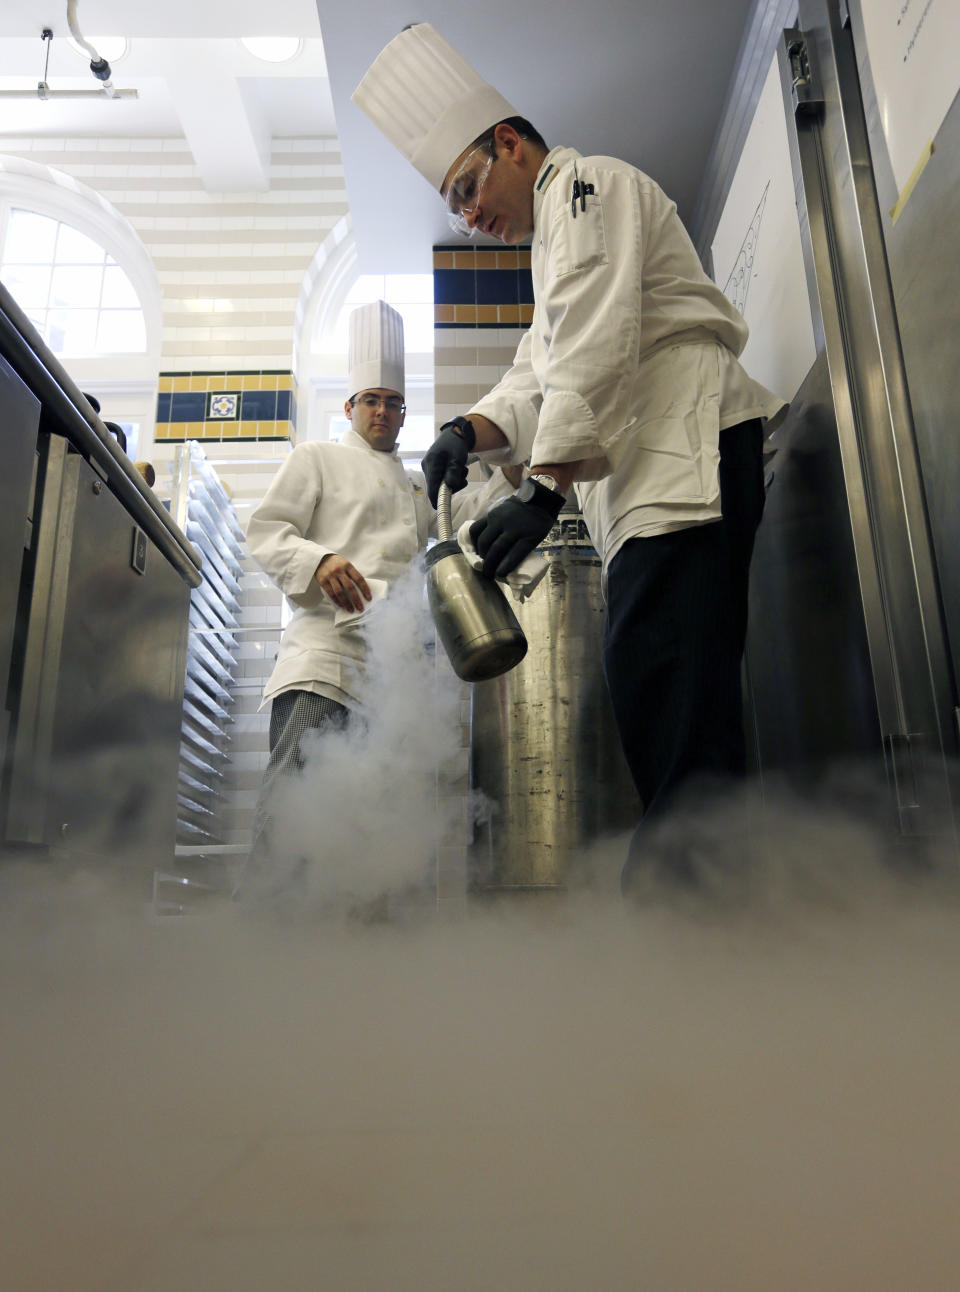 In this image taken on Friday, Sept. 14, 2012, Chef Francisco Migoya, right, fills a container with liquid nitrogen as pastry manager-in-training Douglas Phillips looks on, at the Culinary Institute of America in Hyde Park, N.Y. This esteemed cooking school north of New York City is dramatically pumping up science instruction, saying that tomorrow's chefs will need more technical know-how in the age of molecular gastronomy and sous-vide. (AP Photo/Mike Groll)